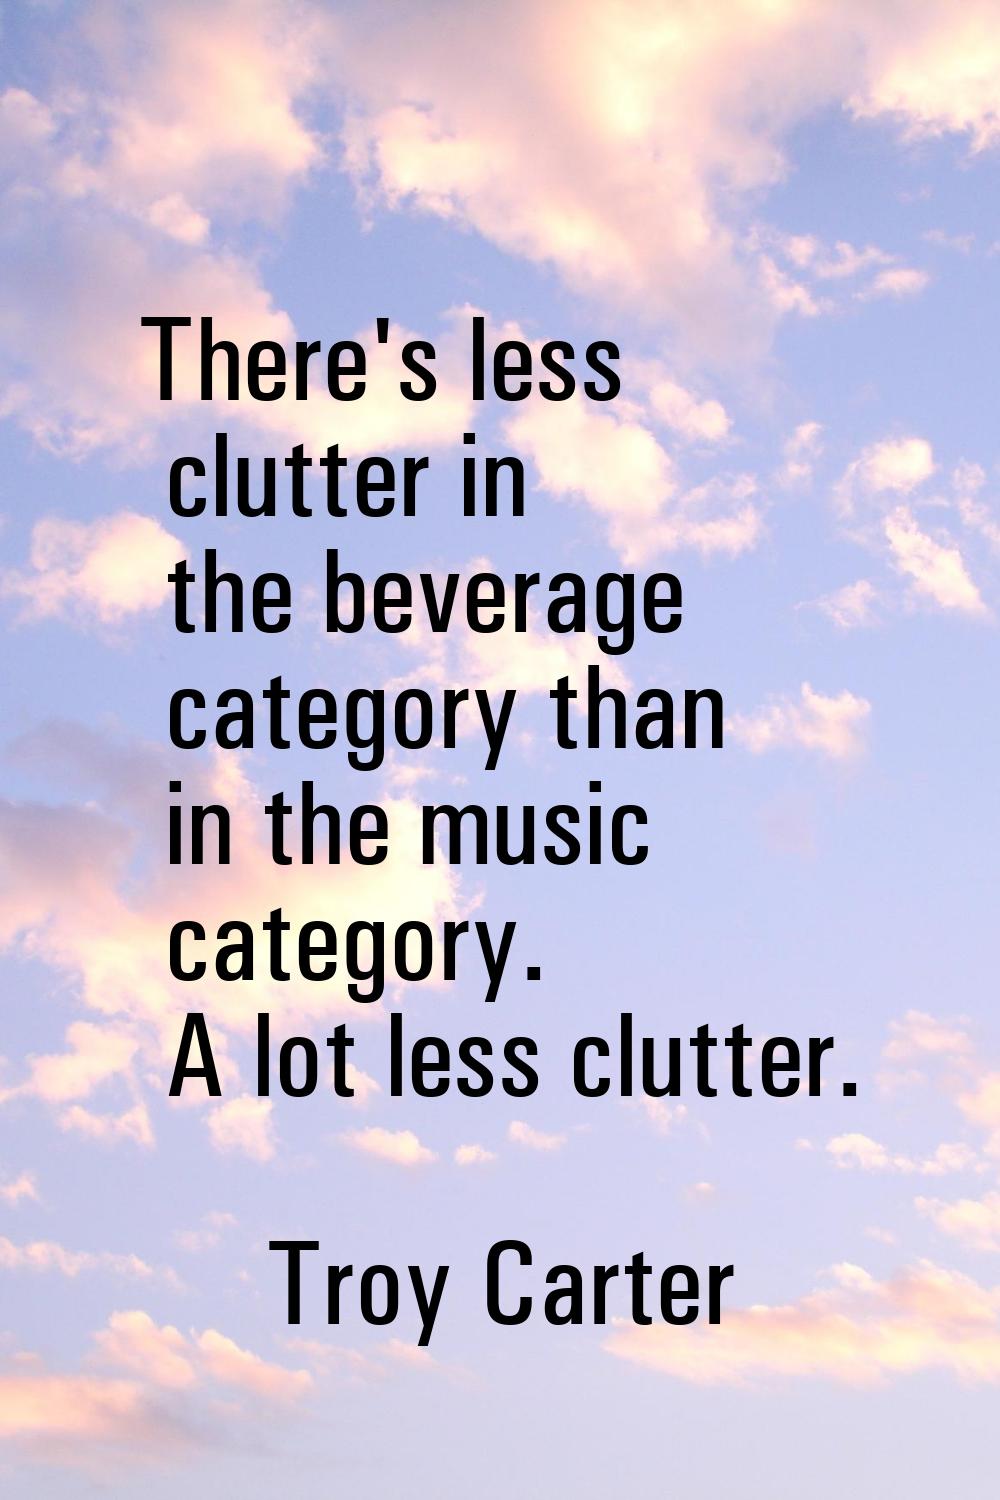 There's less clutter in the beverage category than in the music category. A lot less clutter.